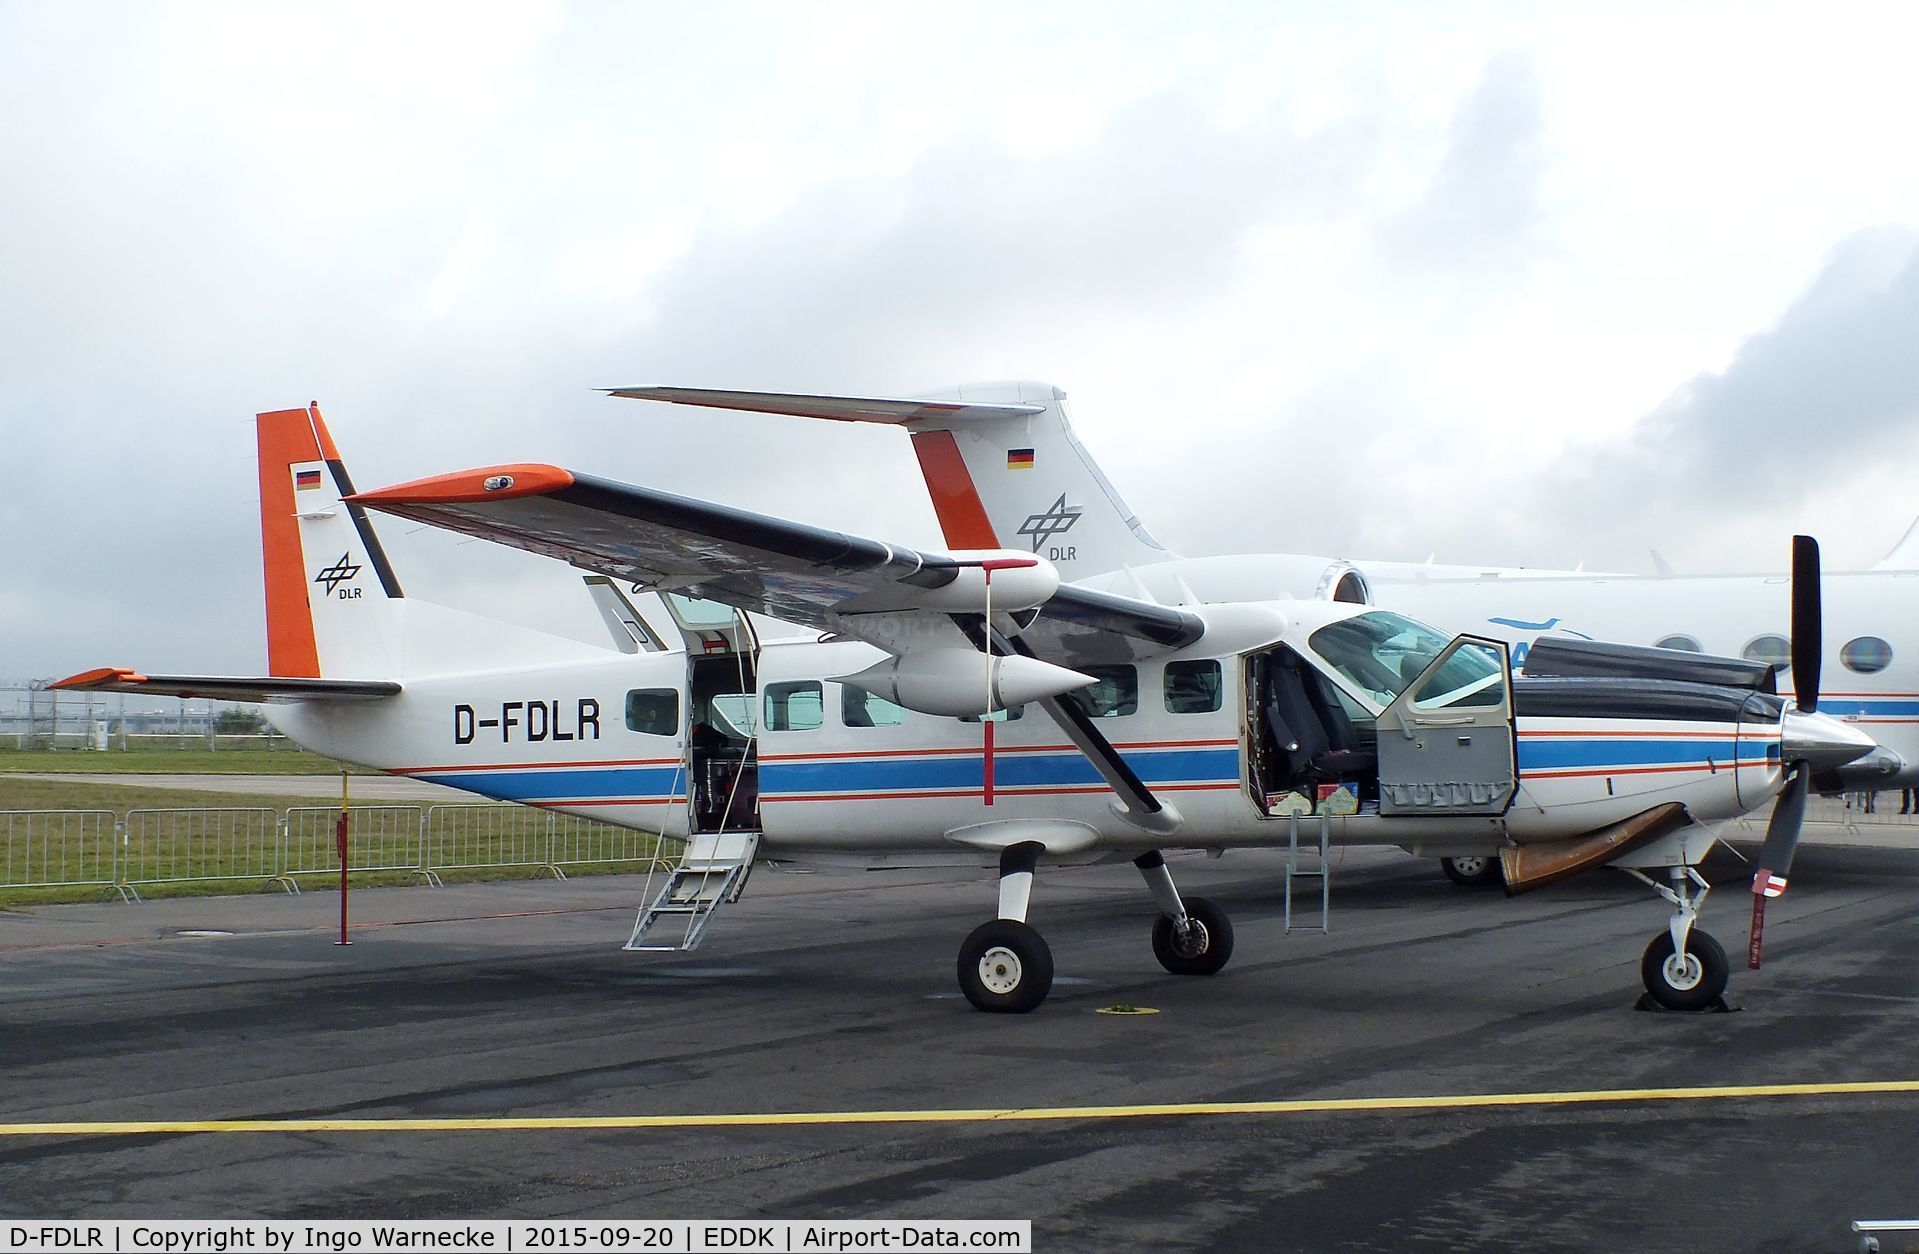 D-FDLR, 1998 Cessna 208B Grand Caravan C/N 208B-0708, Cessna 208B Grand Caravan research aircraft of DLR at the DLR 2015 air and space day on the side of Cologne airport